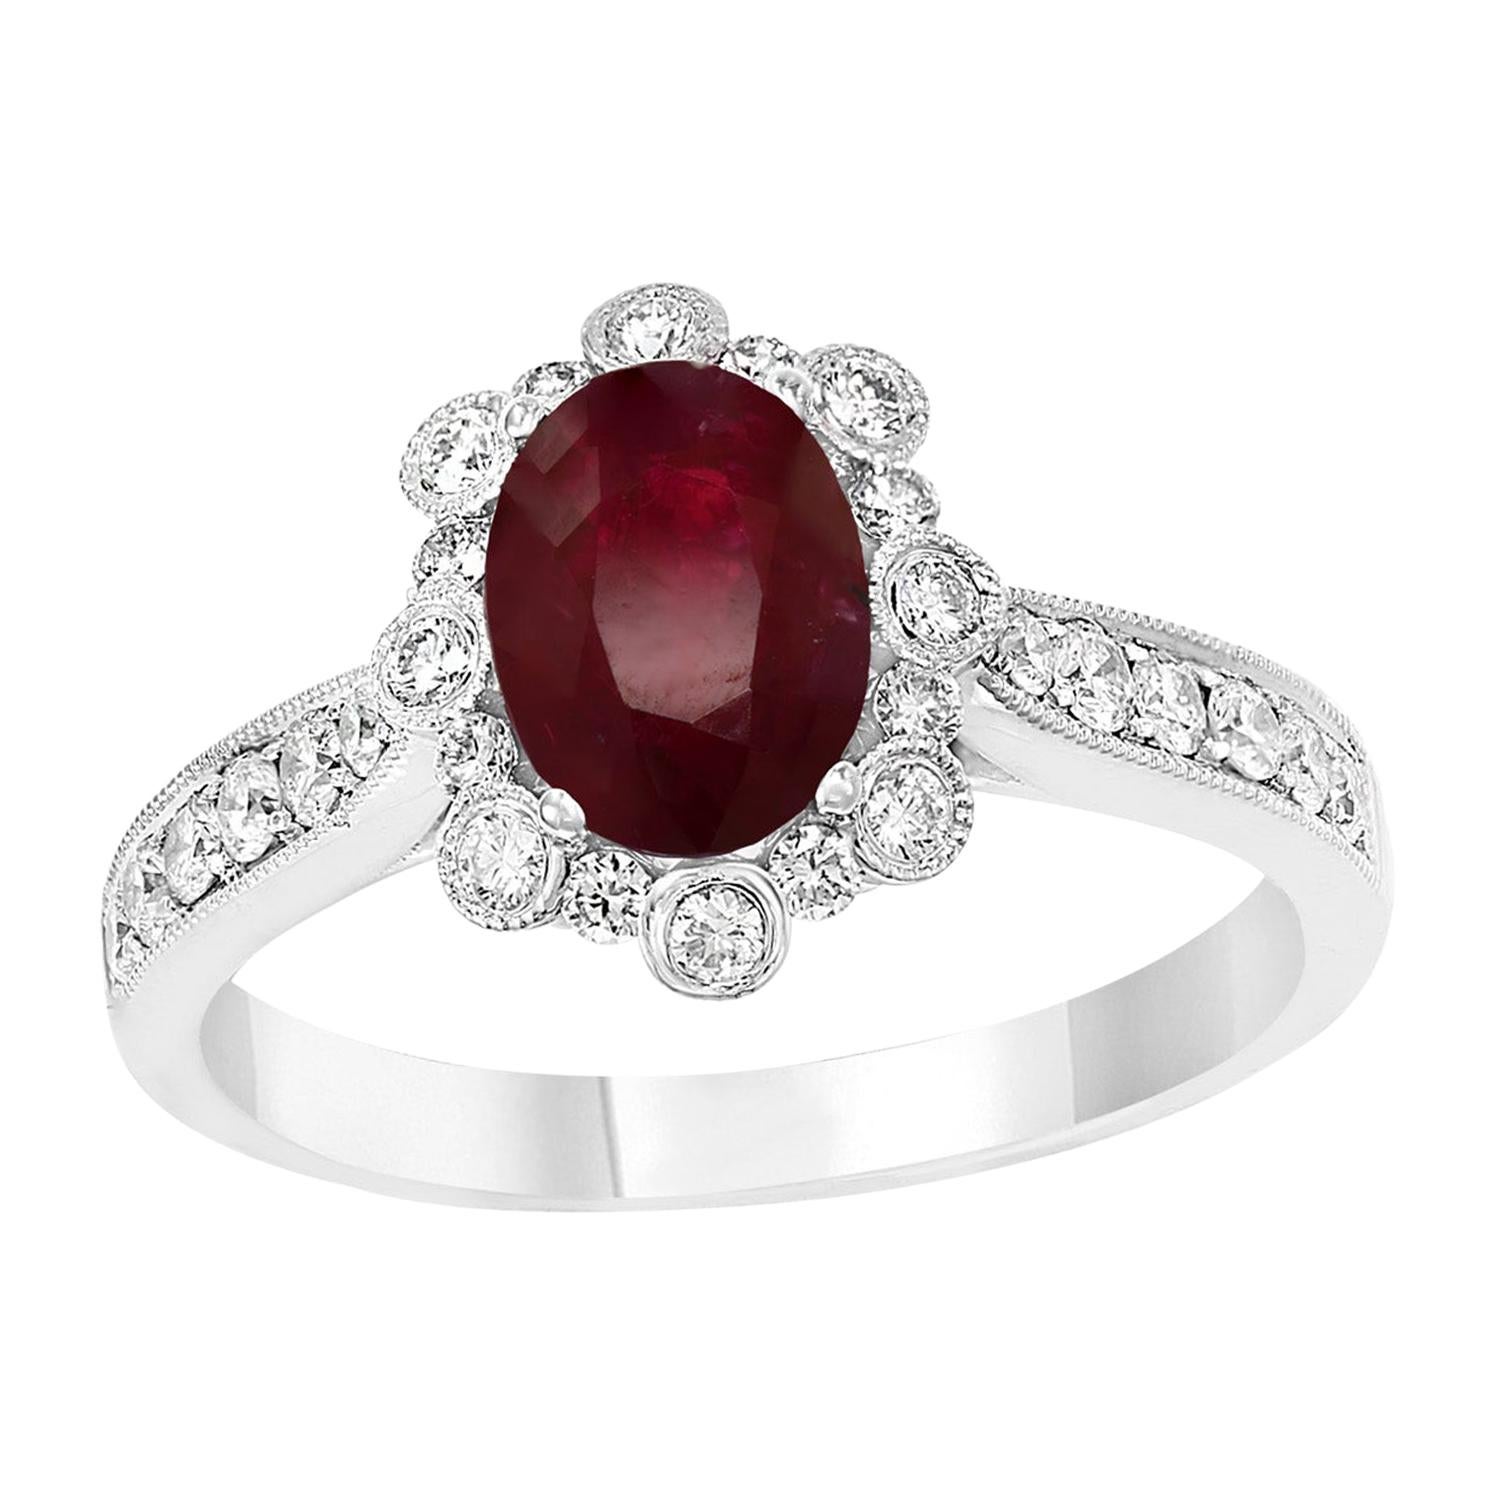 Grandeur 0.83 Carat Oval Cut Ruby and Diamond Engagement Ring in 18K White Gold For Sale